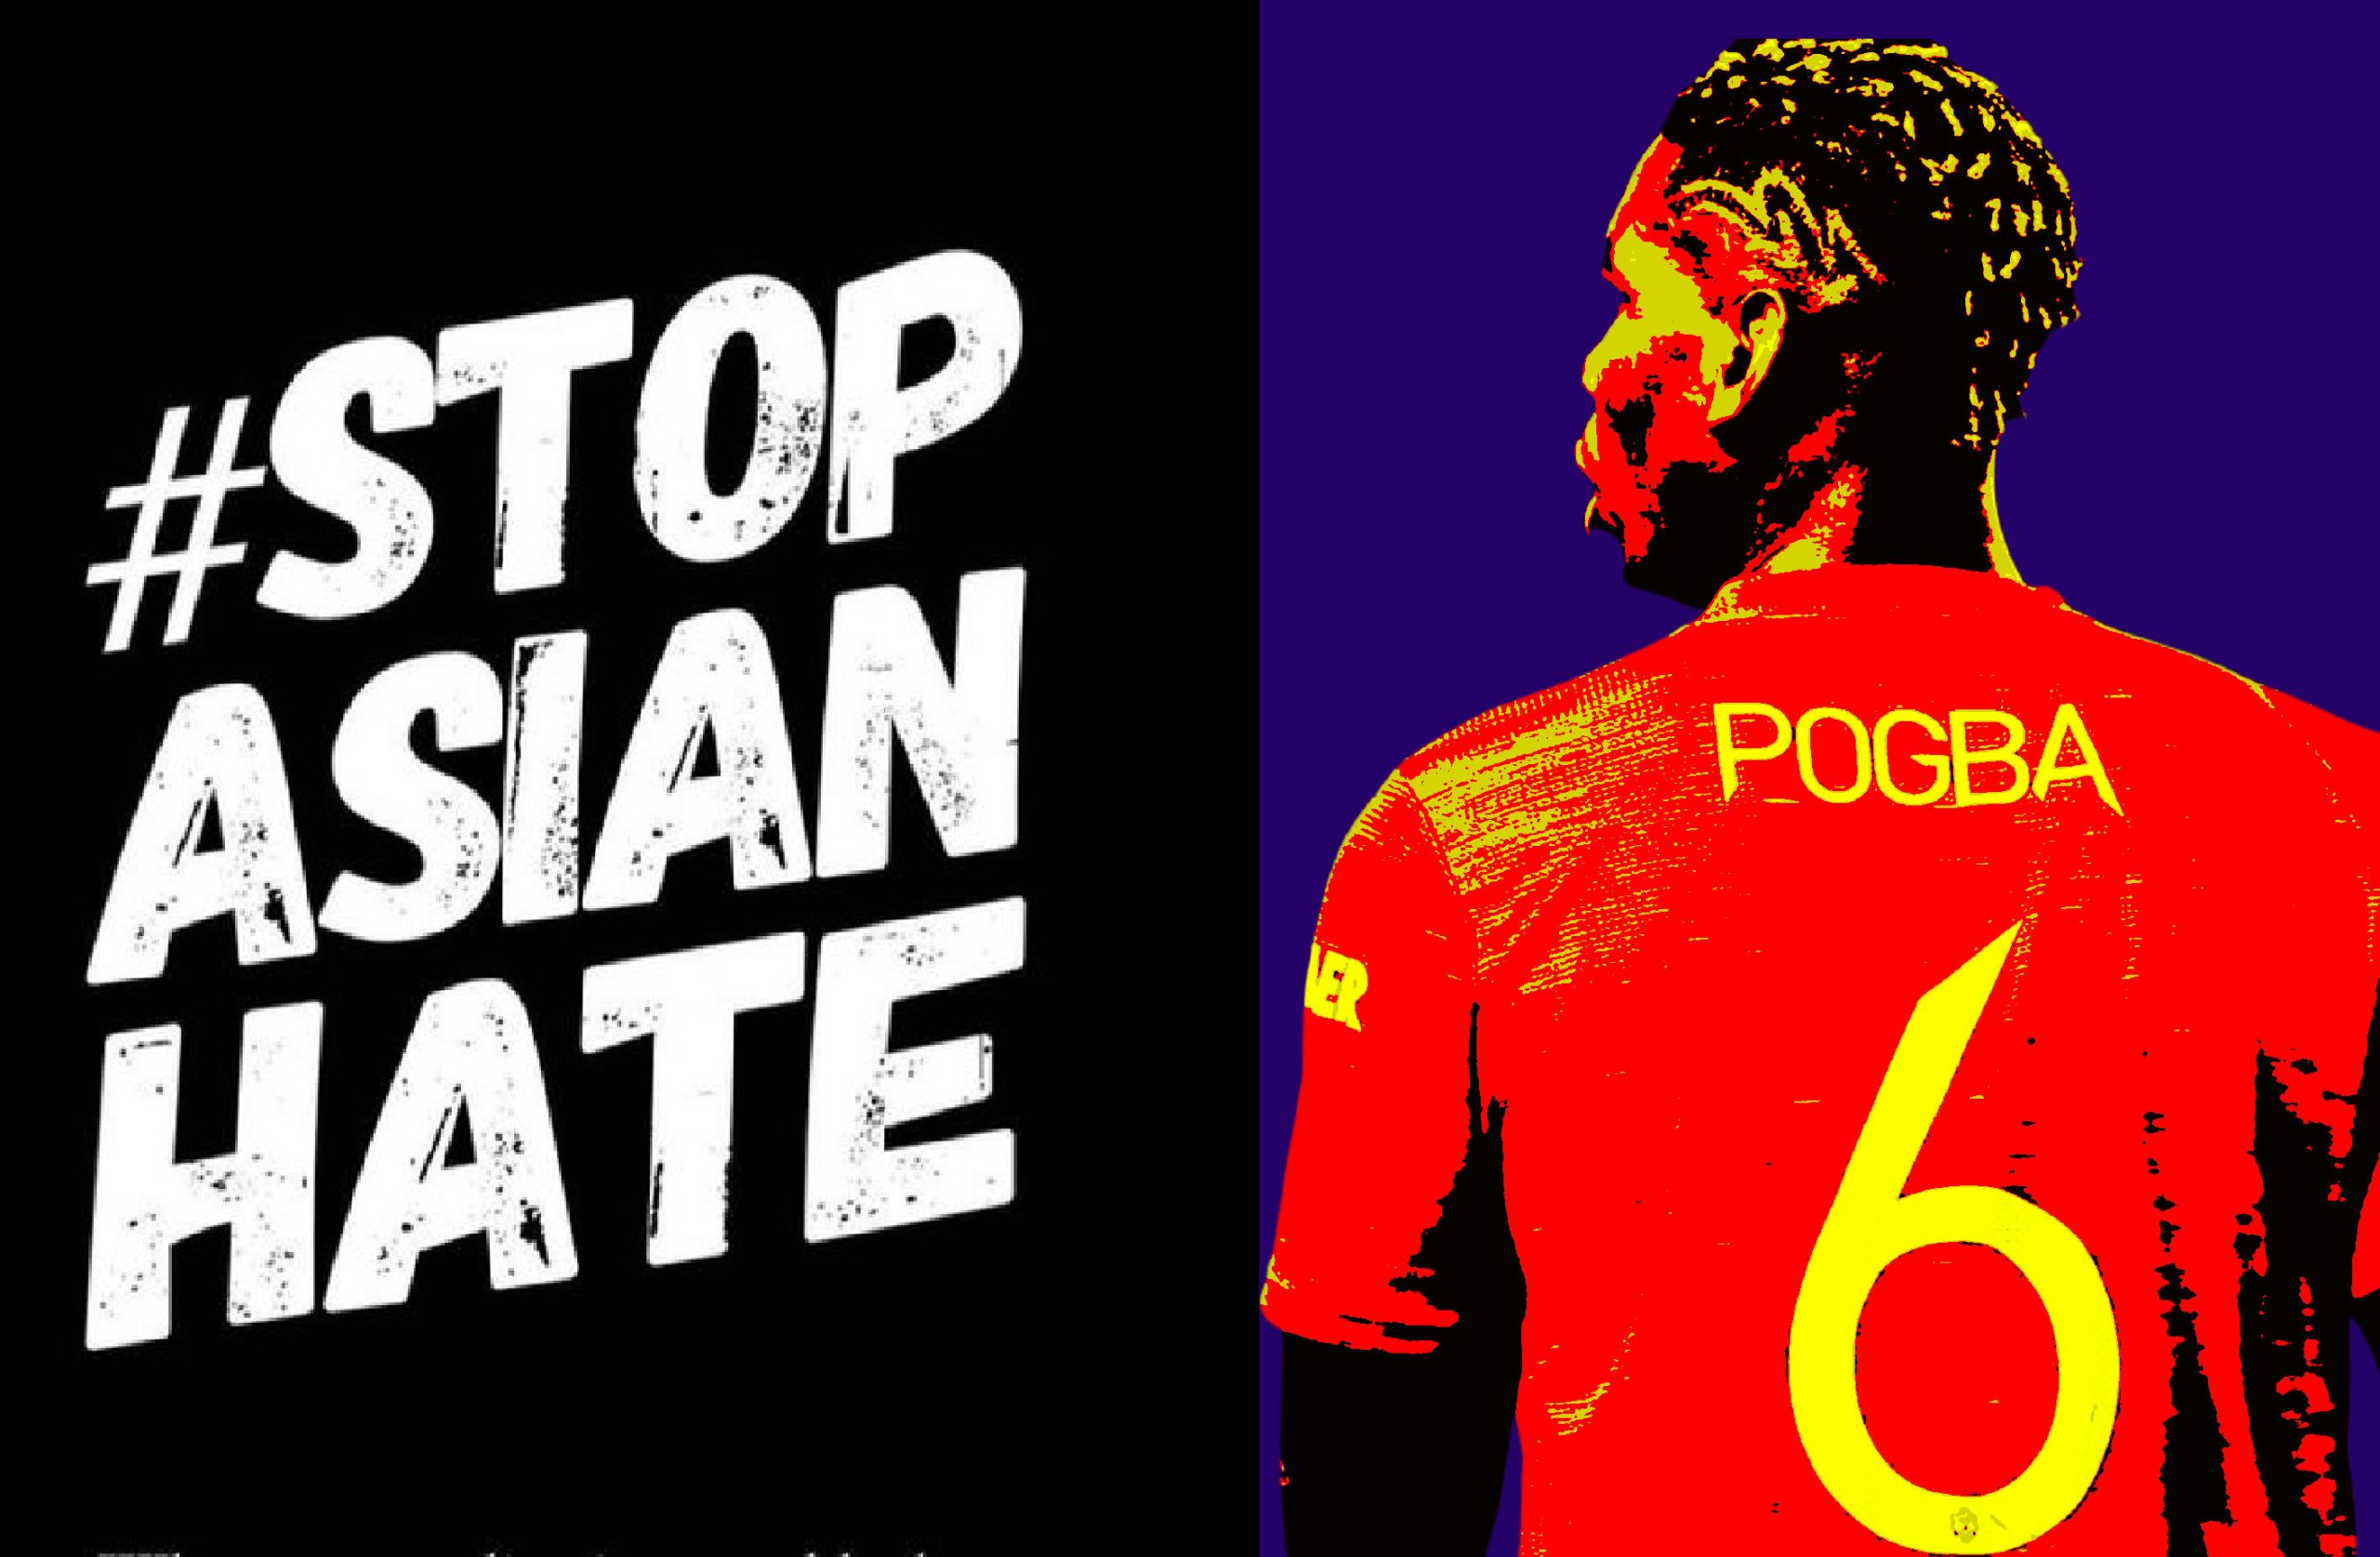 Paul Pogba sends a strong message highlighting racism against Asians